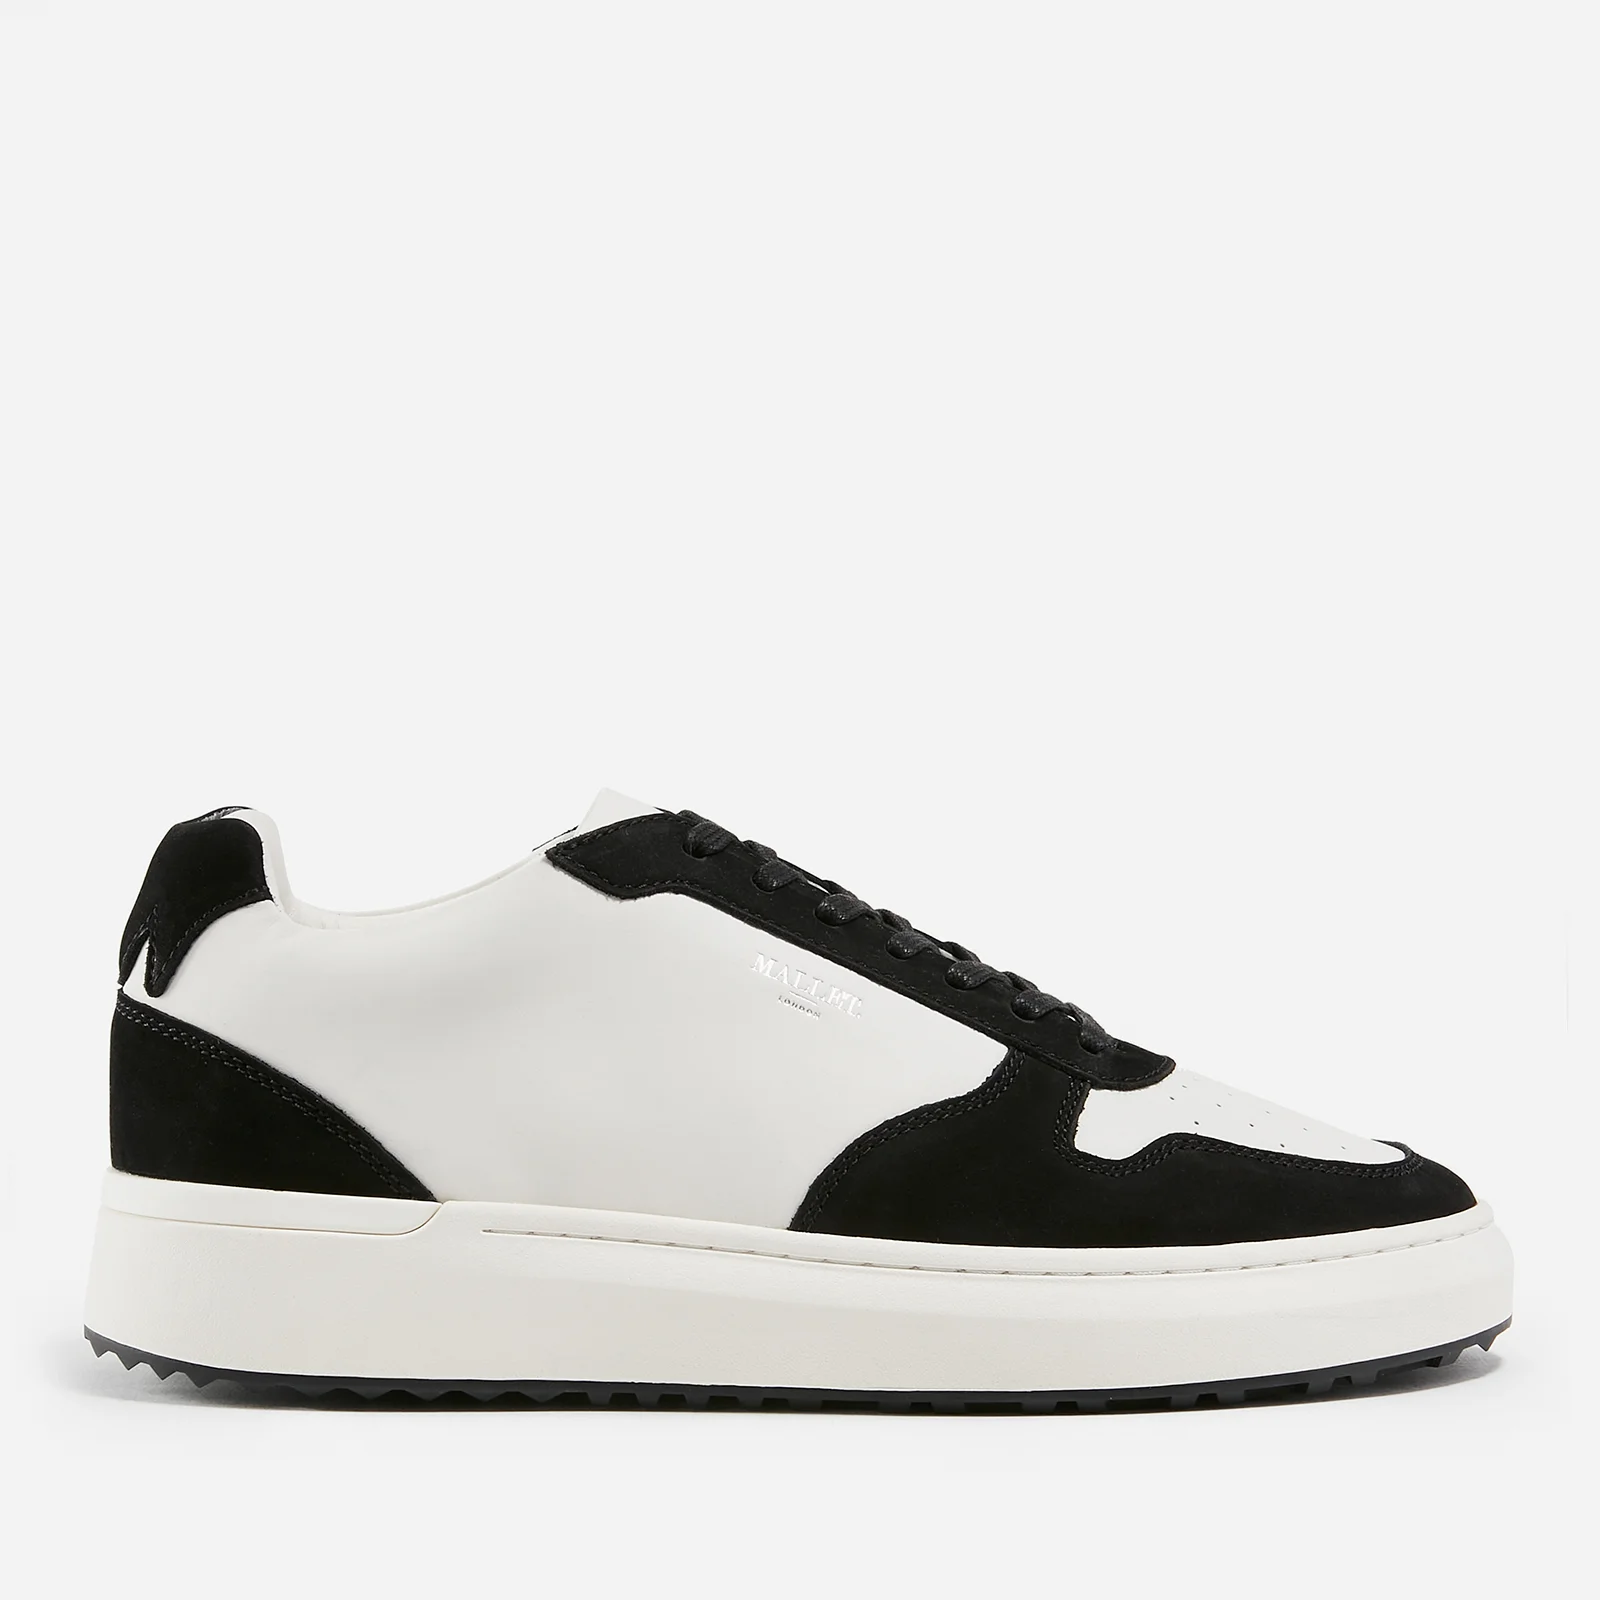 Mallet Men's Hoxton 2.0 Leather and Suede Trainers Image 1